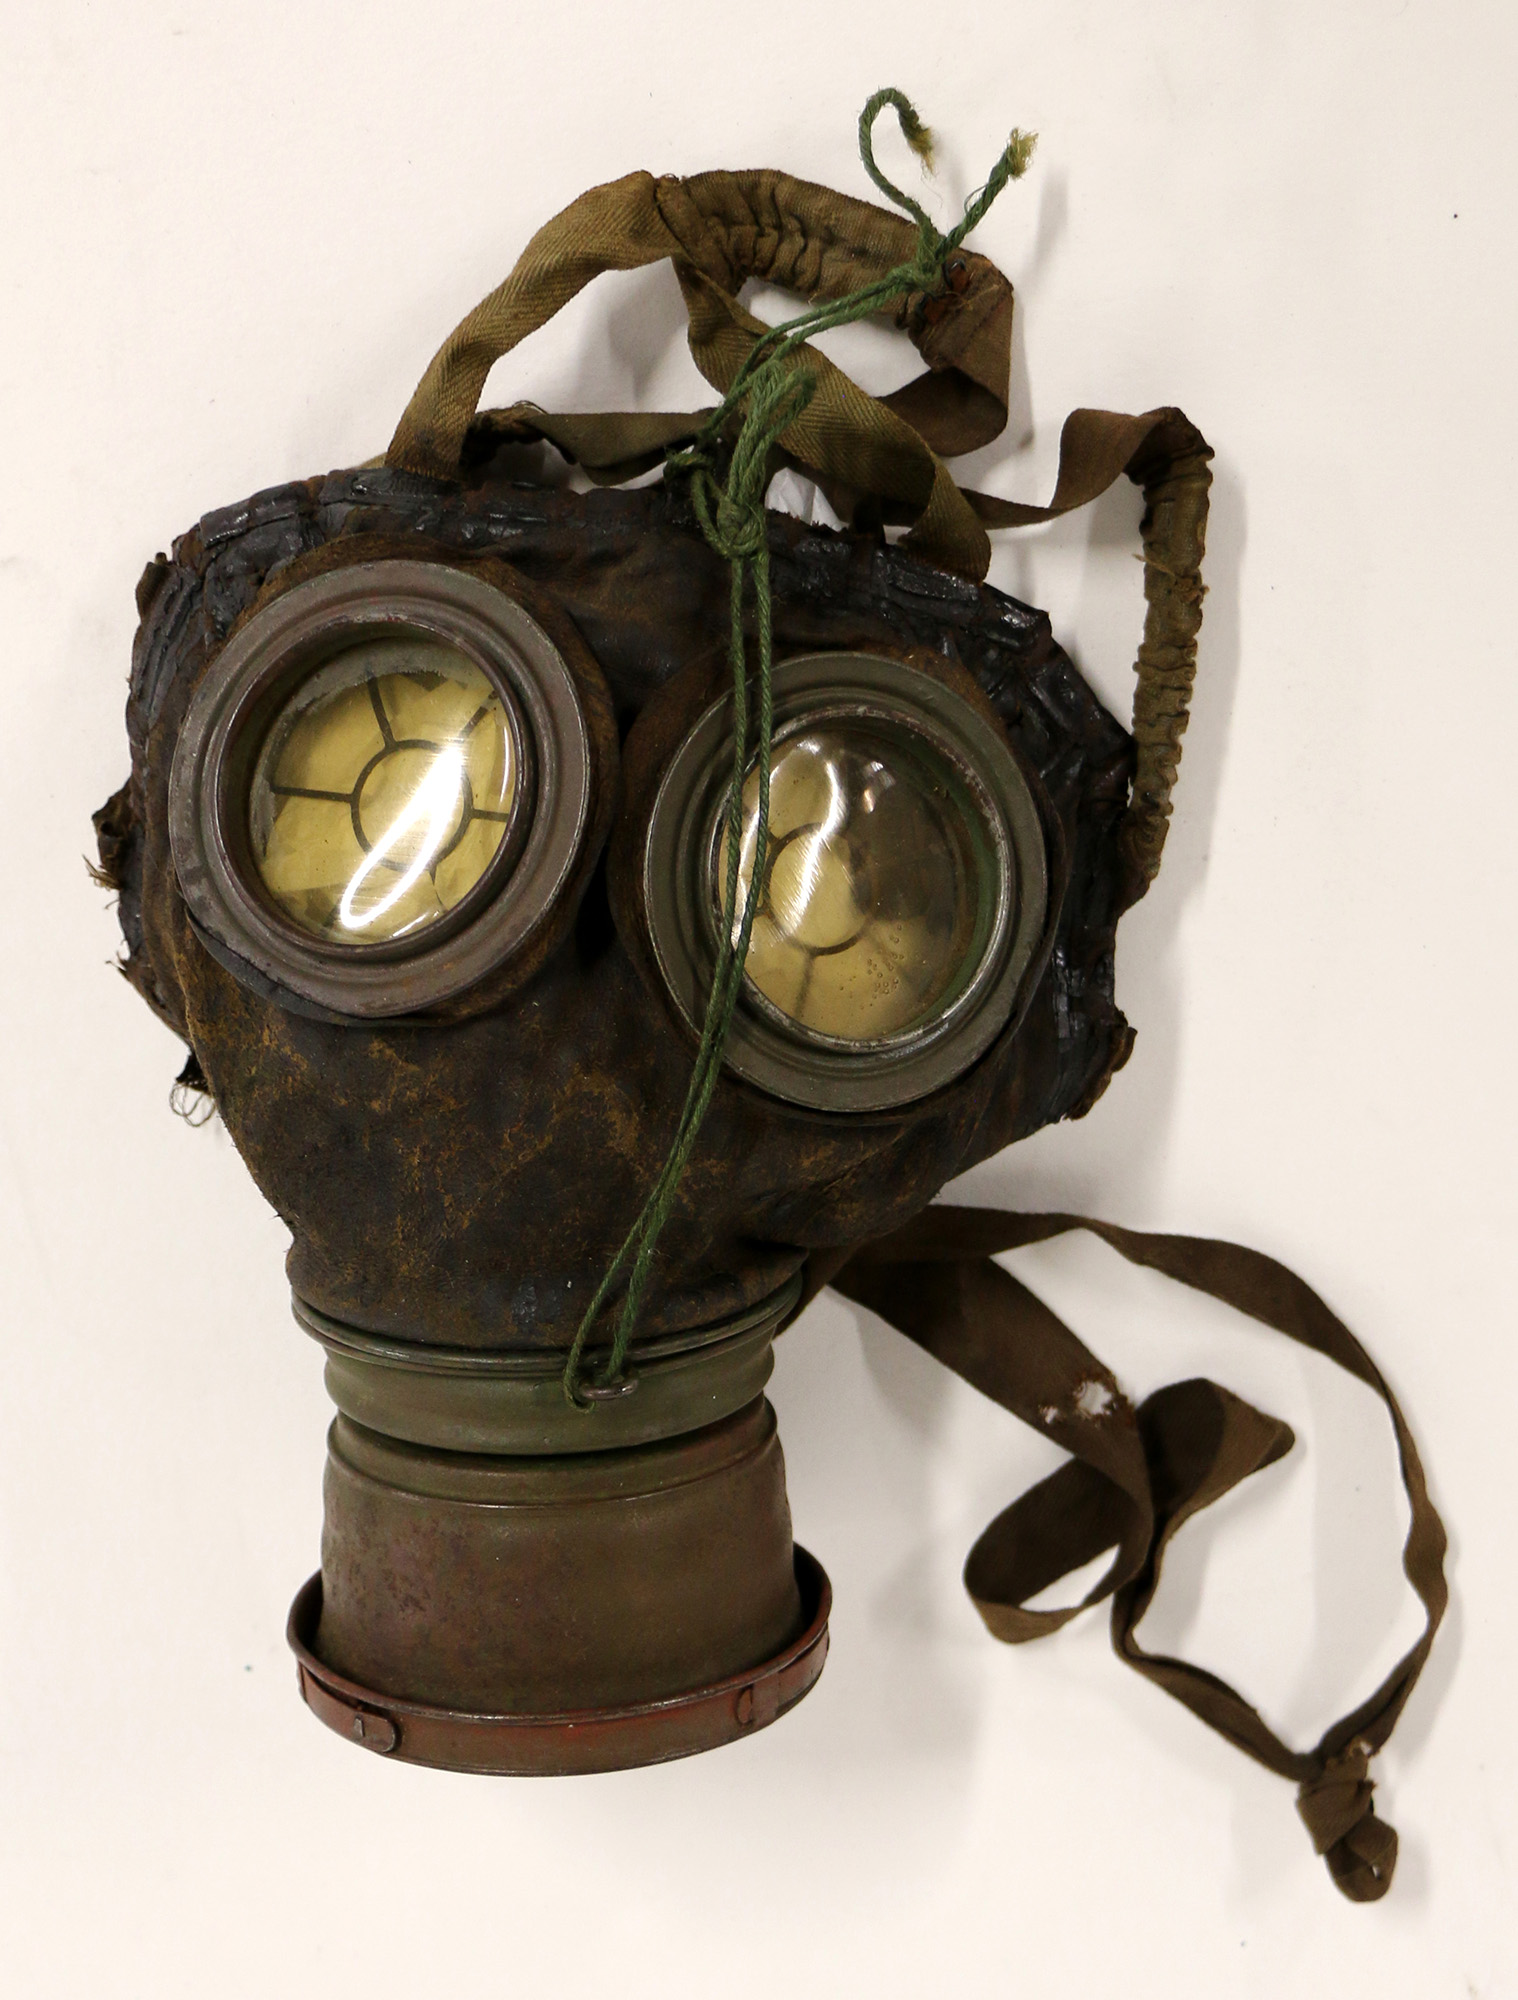 Modern photograph of a WWI-era gas mask against a white background